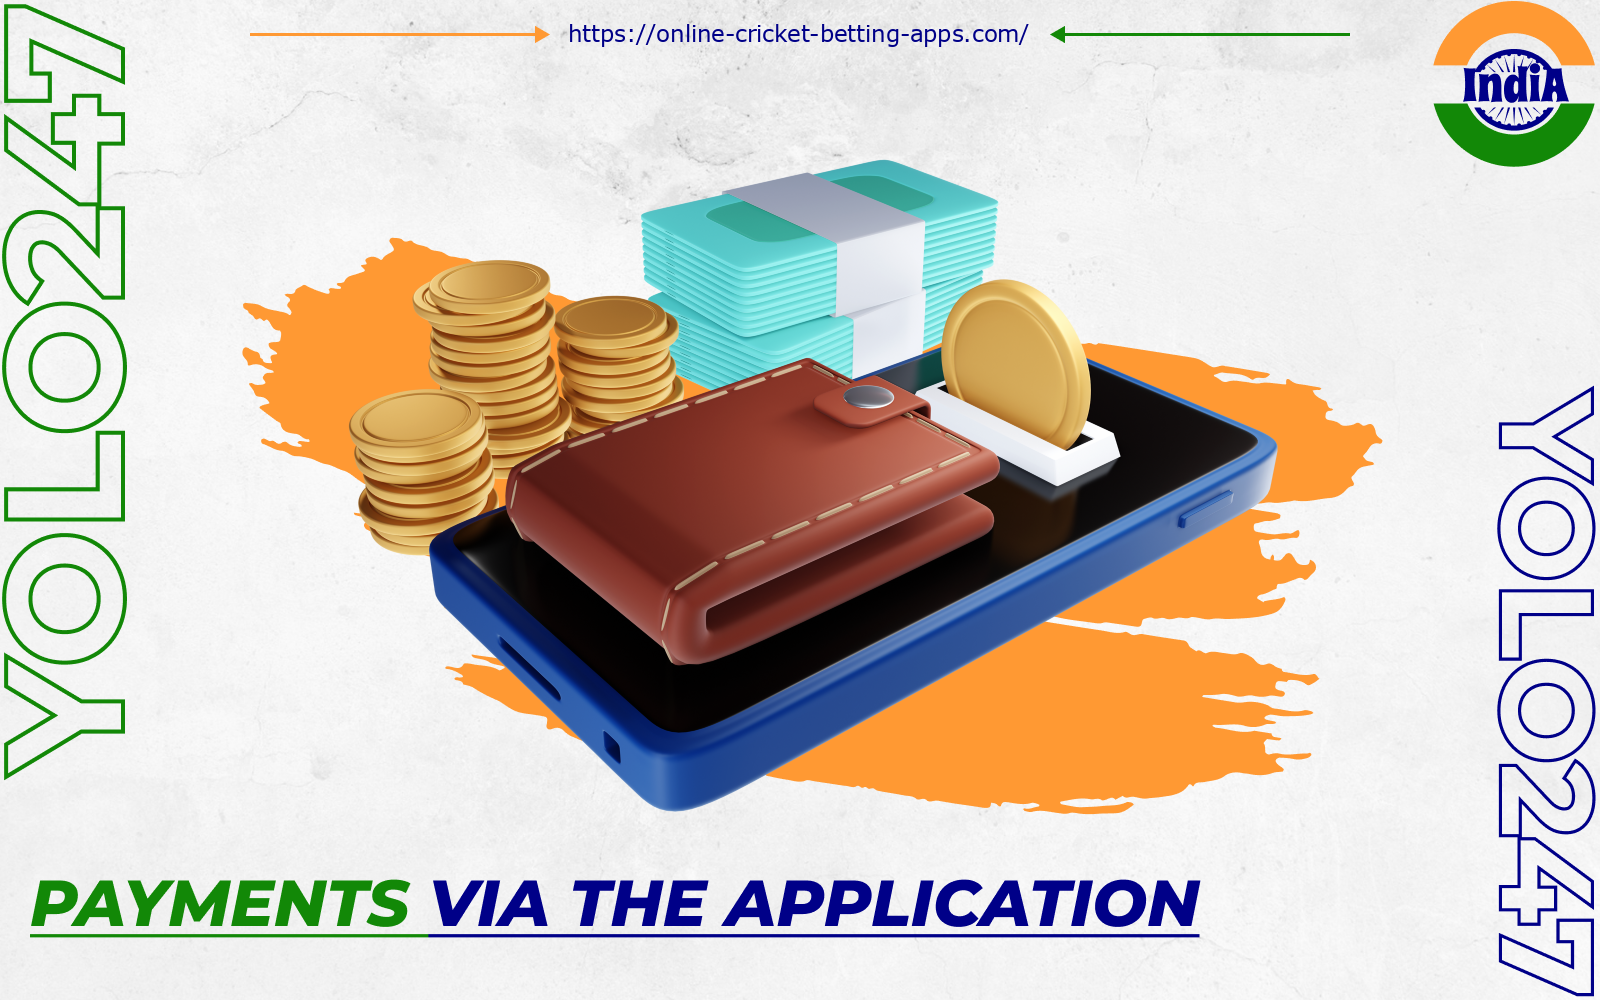 Using the Yolo247 app, users can top up their INR account balance or withdraw their winnings